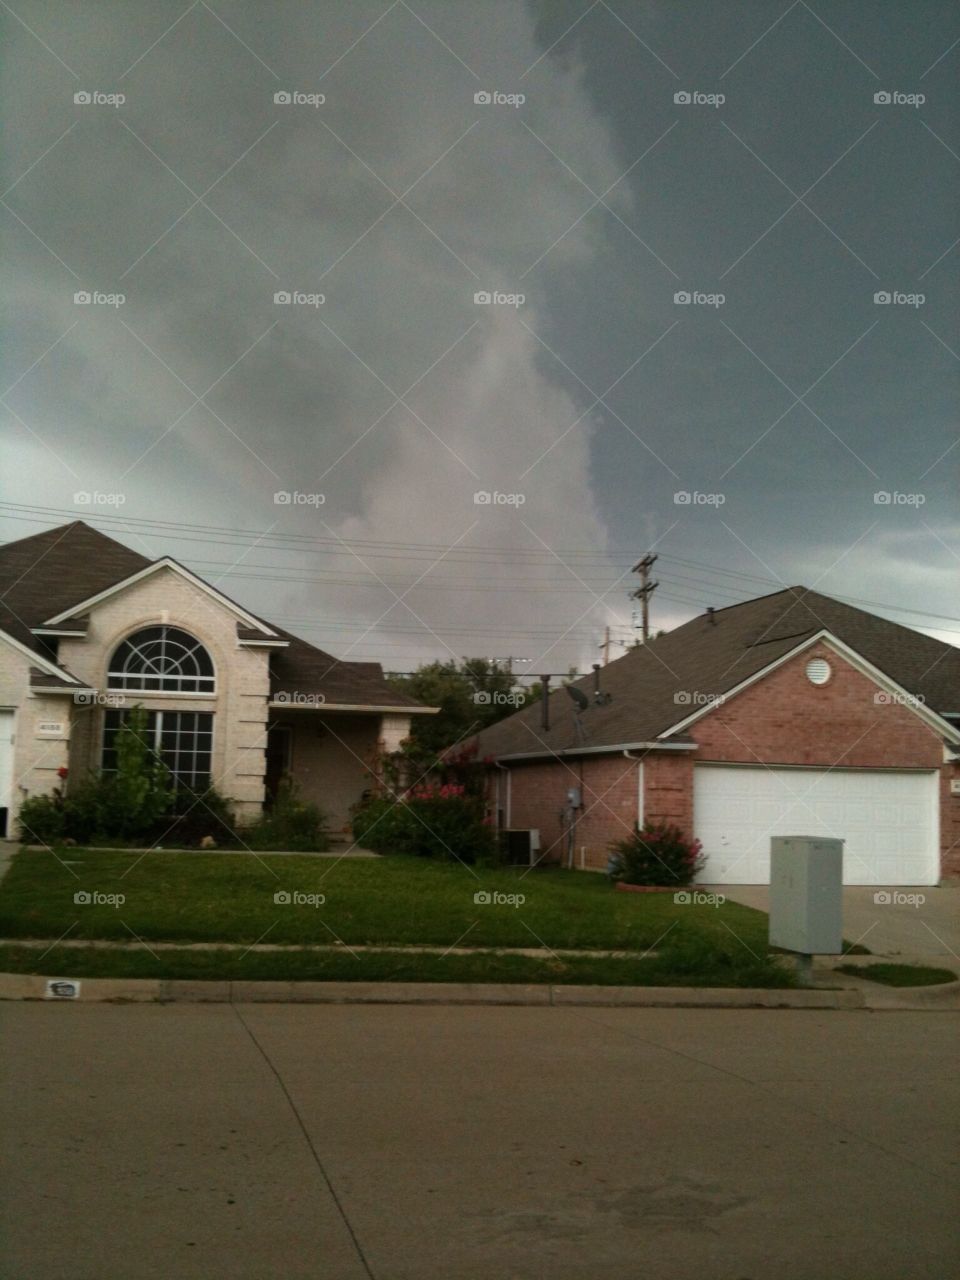 Amazing tornado moving past my house